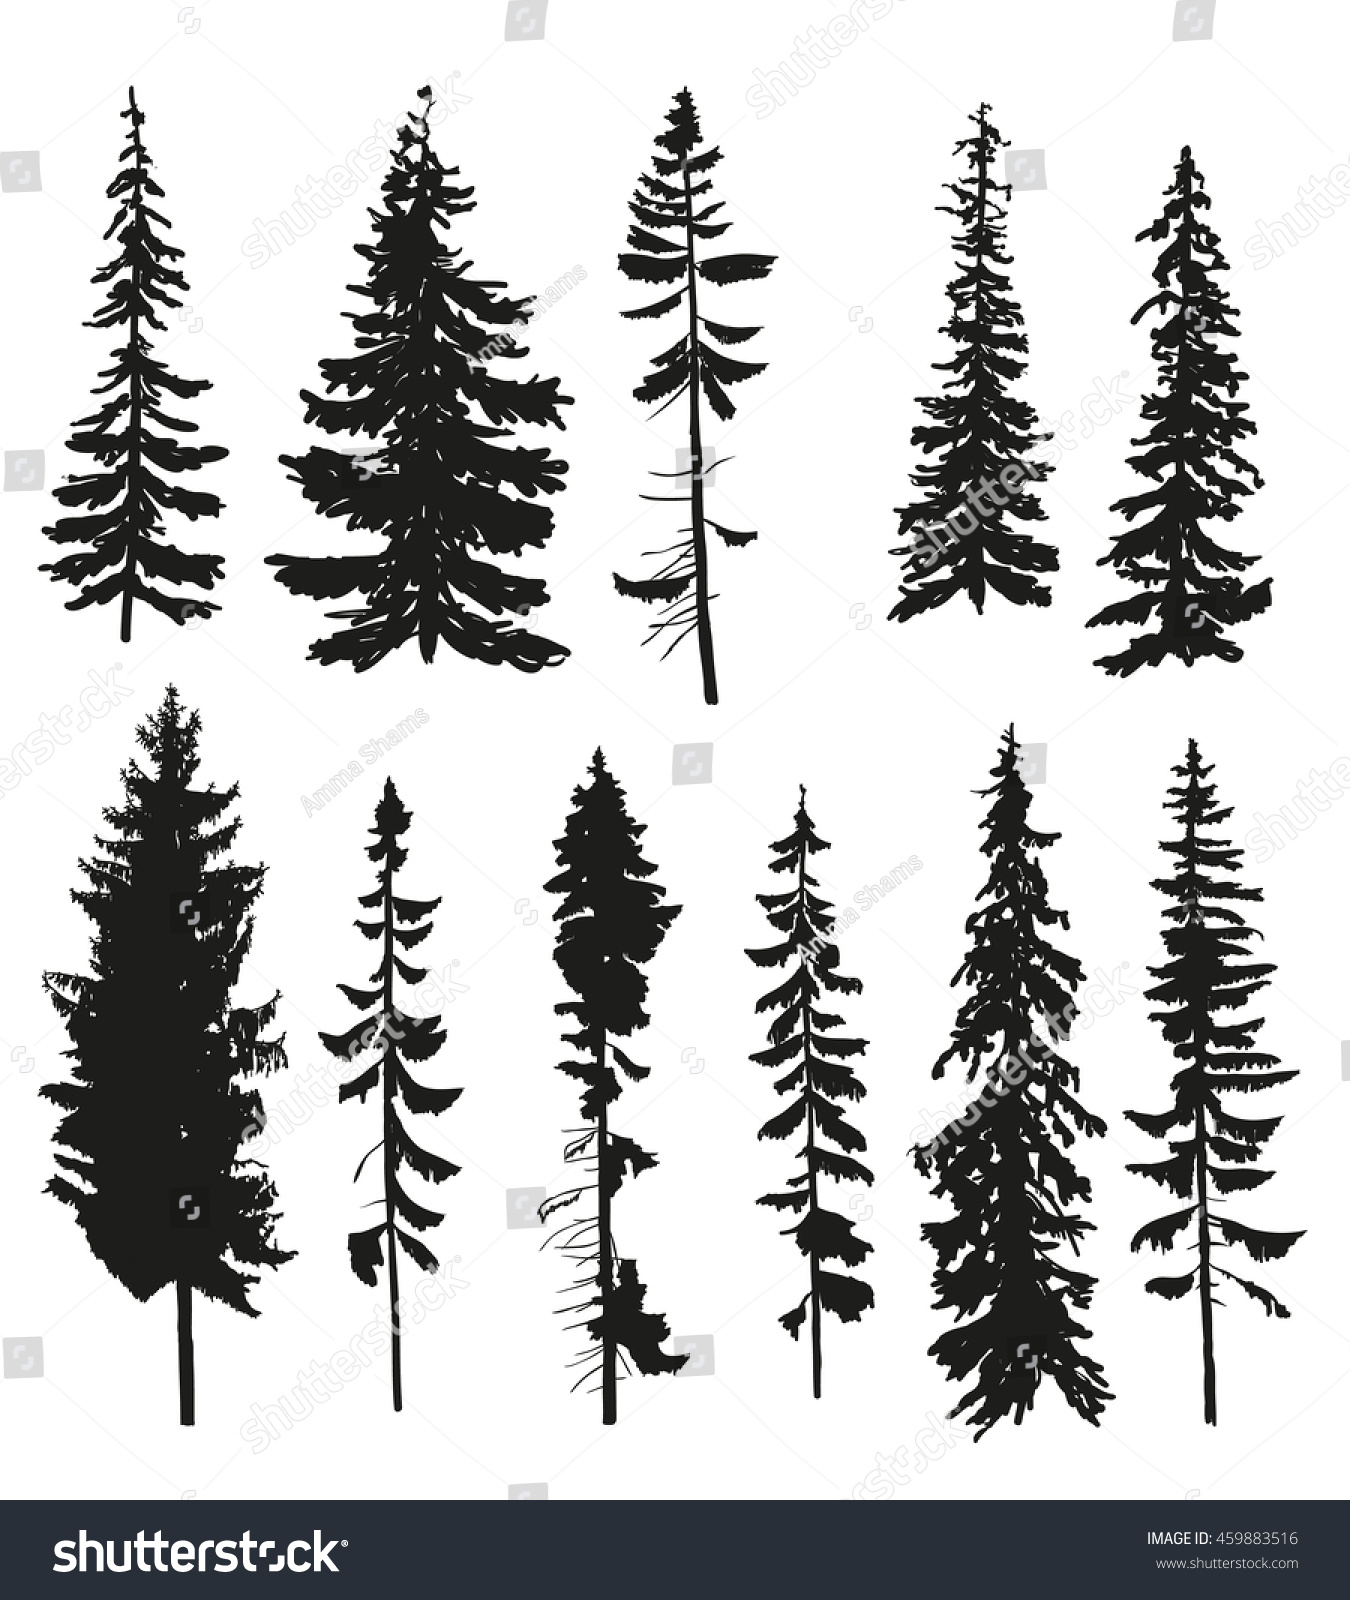 Download Vector Silhouettes Different Pine Trees Stock Vector ...